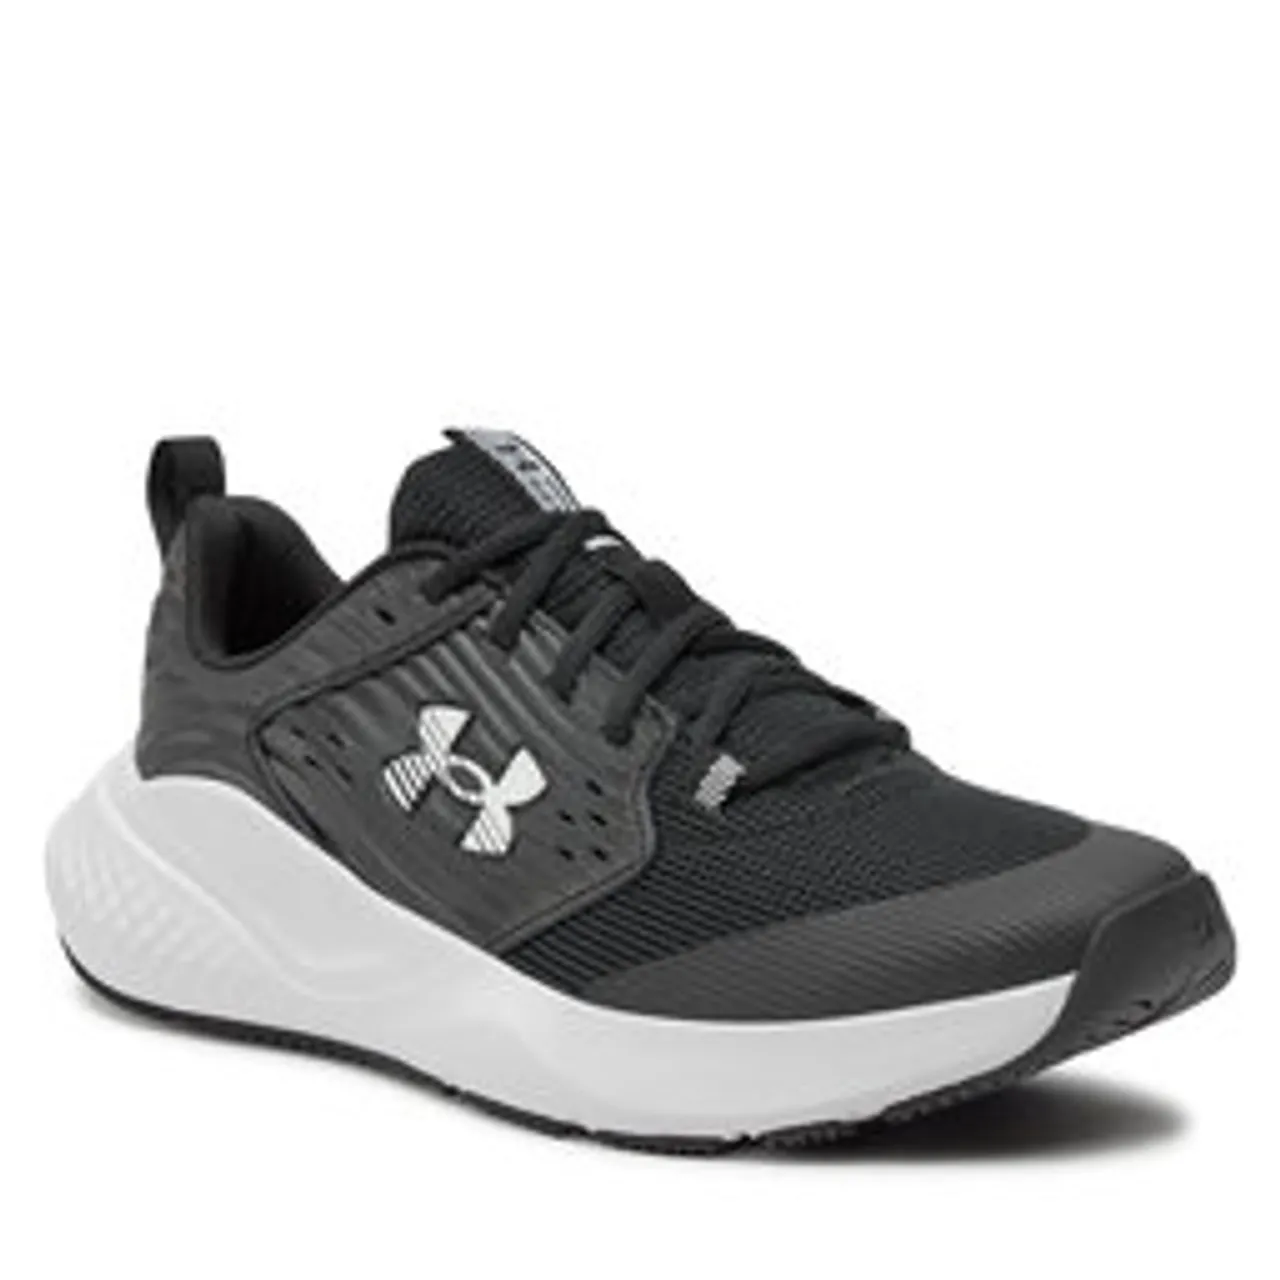 Schuhe Under Armour Ua Charged Commit Tr 4 3026017-004 Black/Anthracite/White